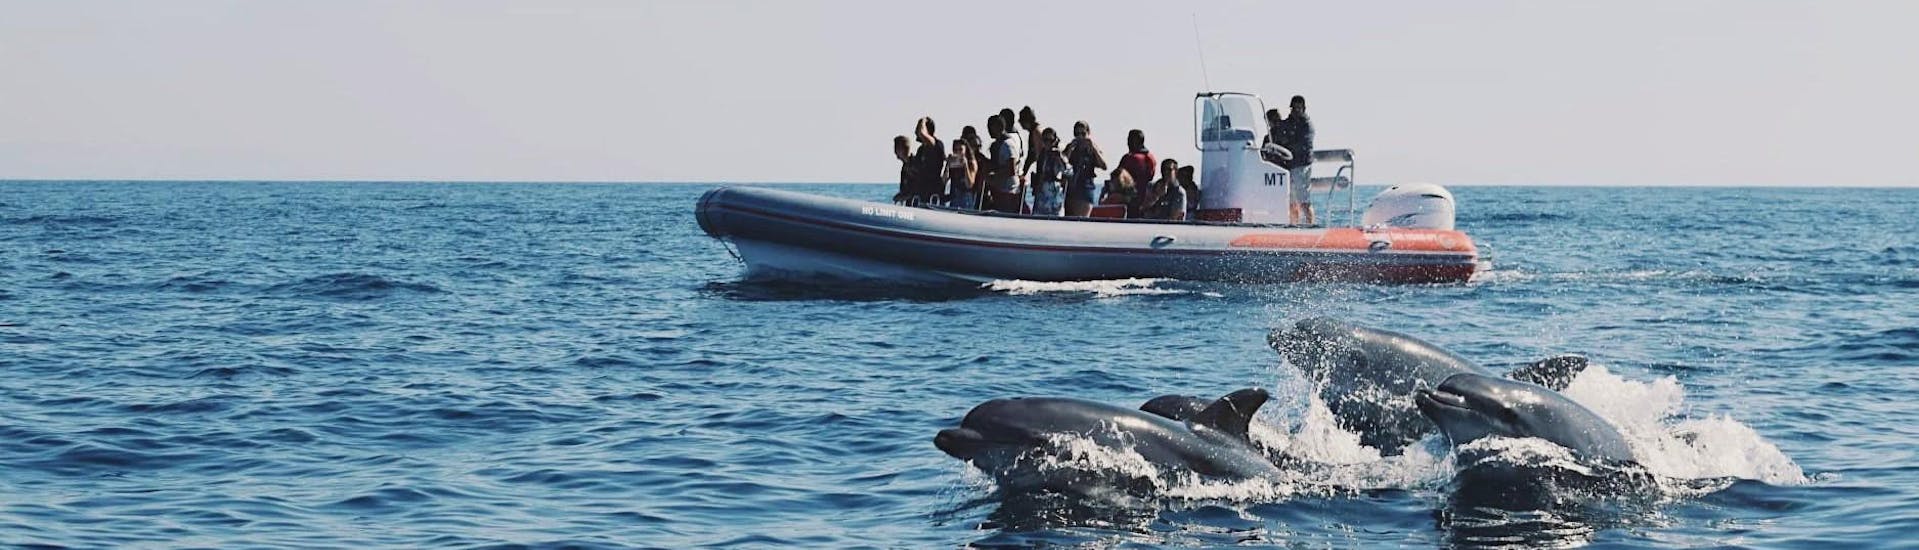 People are taking pictures of wild dolphins swimming around the boat with Allboat Albufeira.